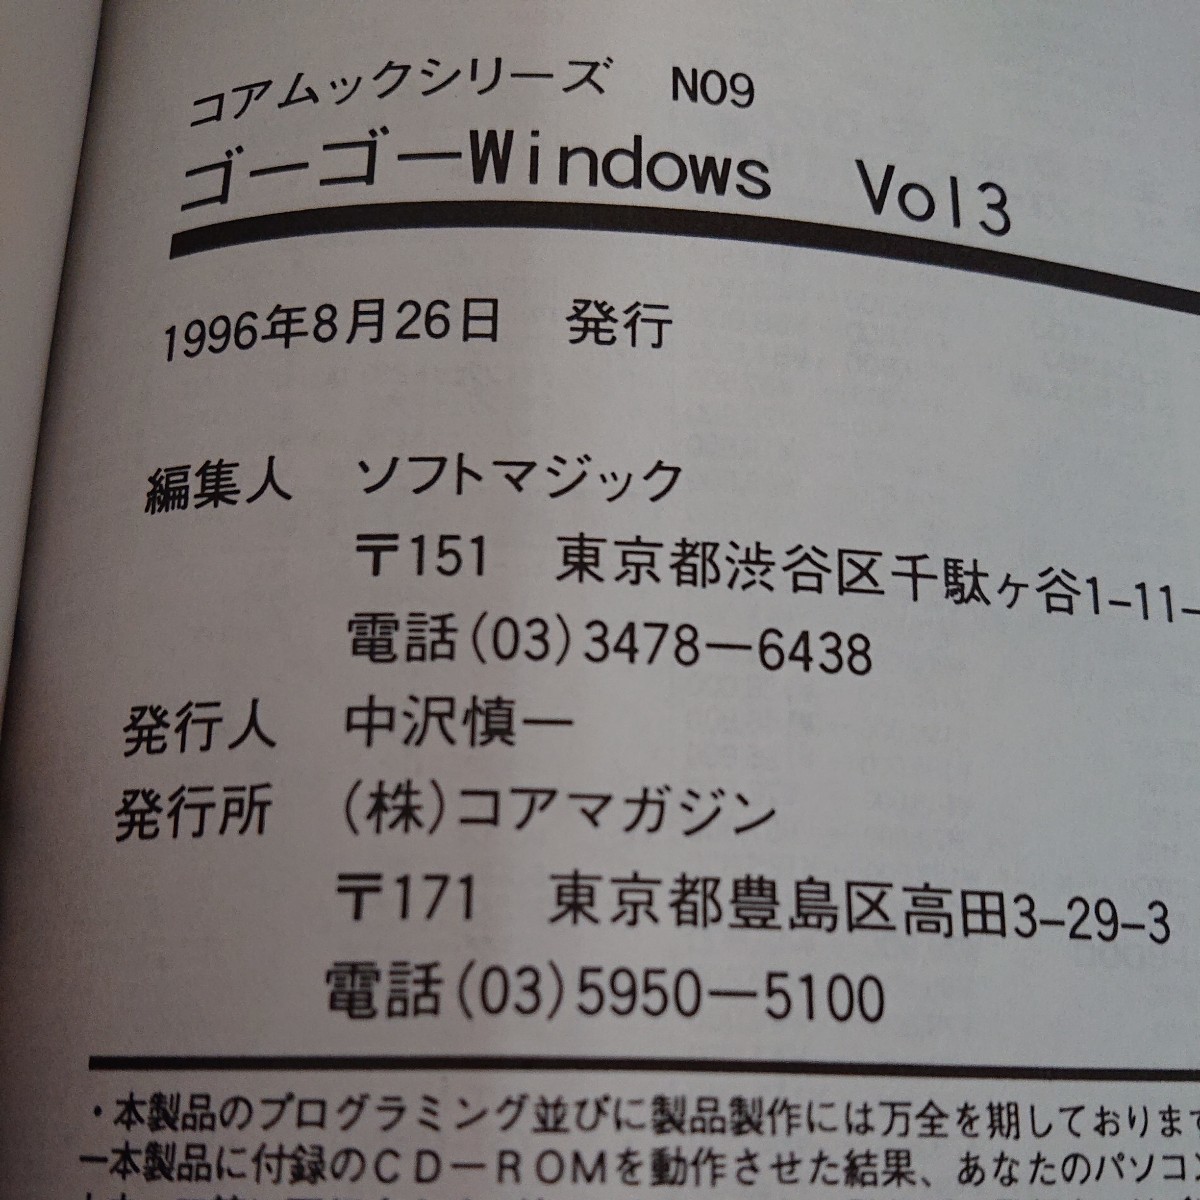 h-534go-go-!! Windows core Mucc series CD attaching enlargement byua-. in addition, version up! 1996 year issue *9